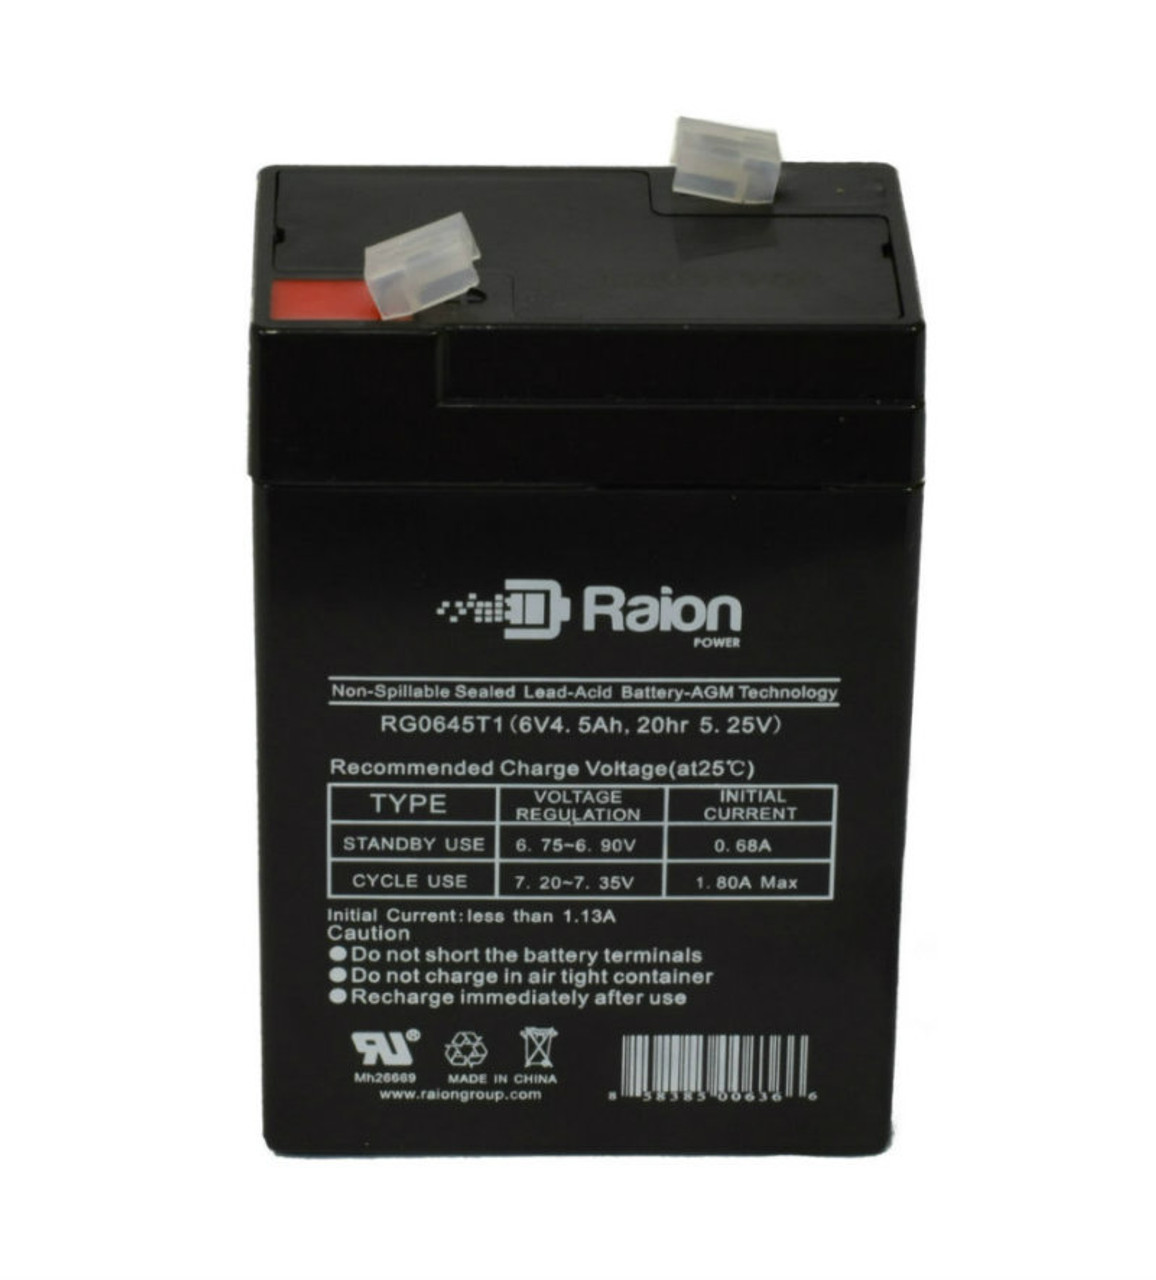 Raion Power RG0645T1 Replacement Battery Cartridge for OUTDO OT4.5-6A